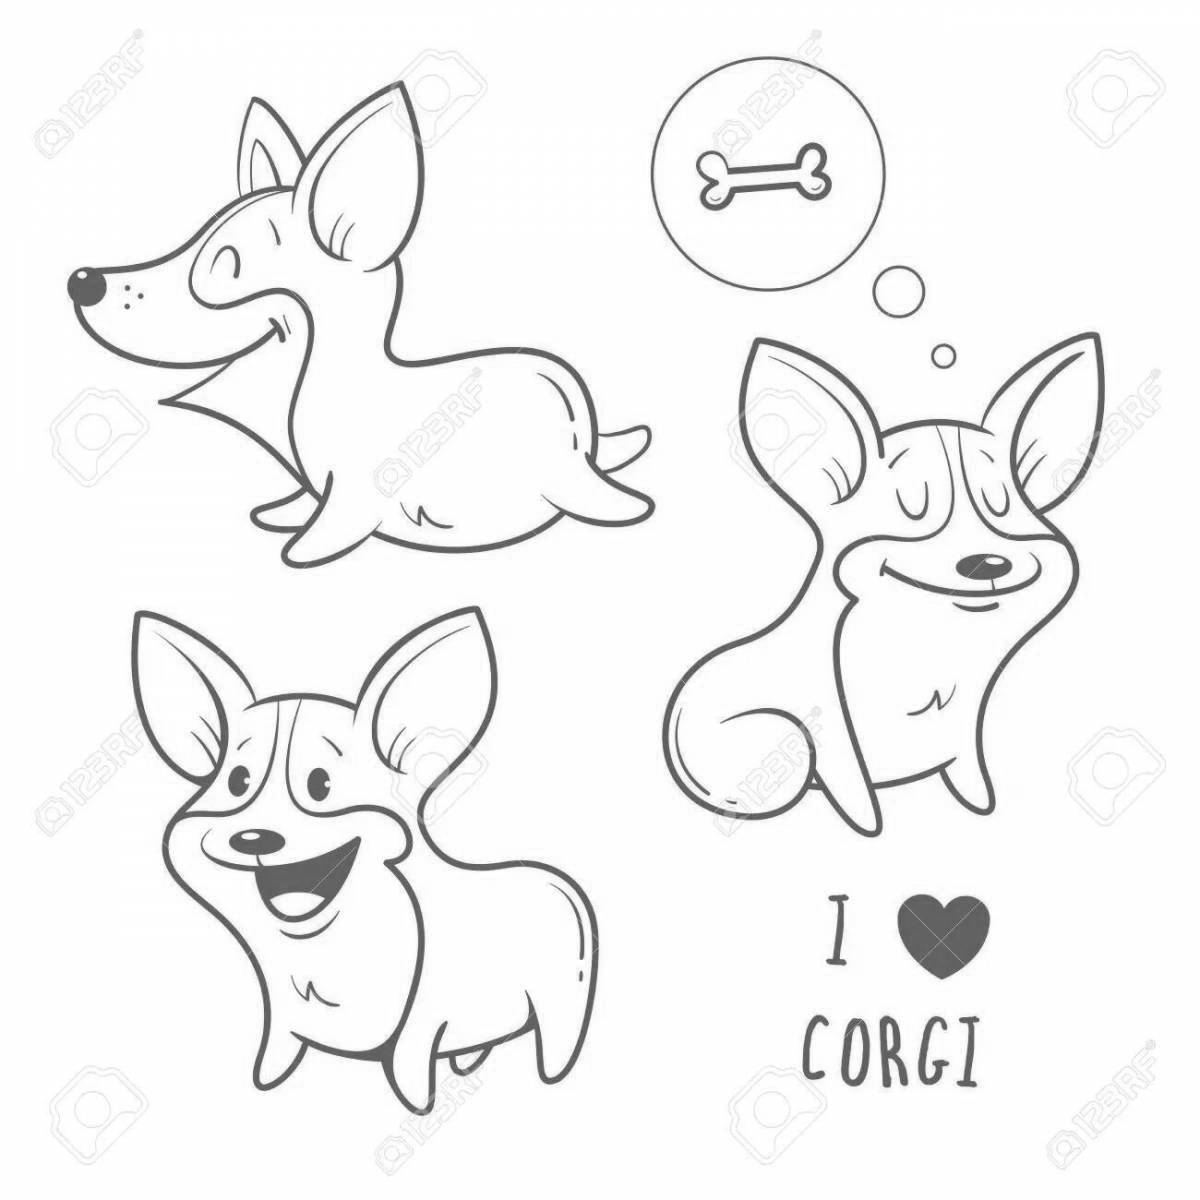 Coloring page giggling cute corgis